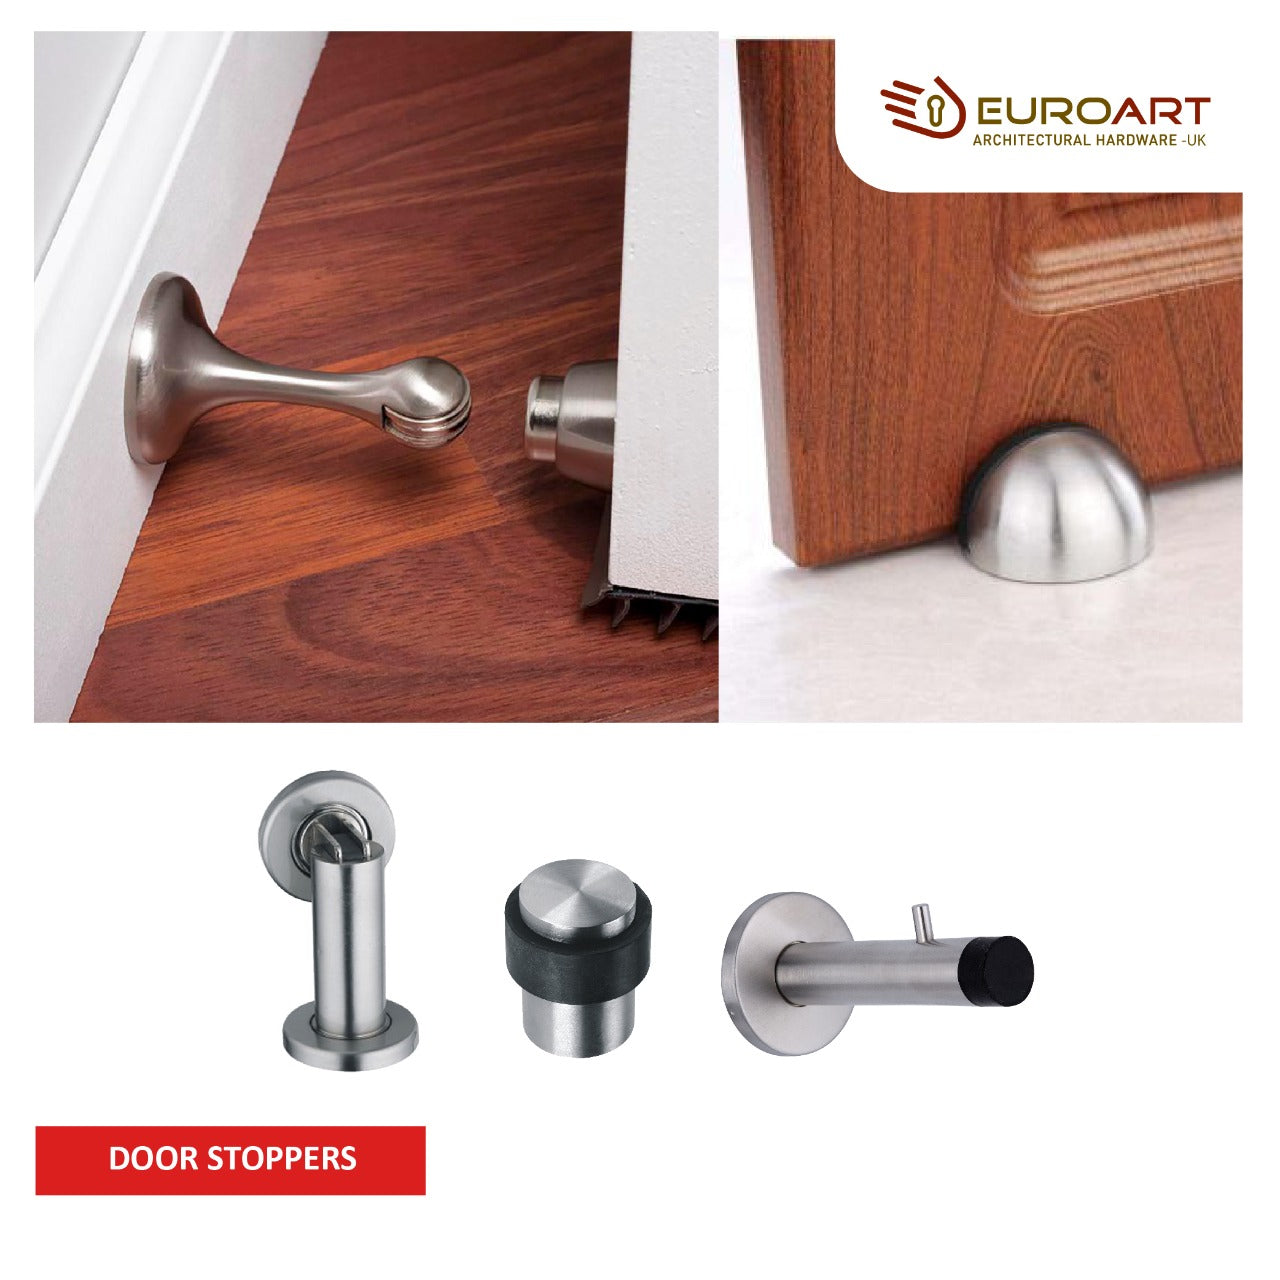 EuroArt Door Stoppers - Keep doors secure and prevent damage with our high-quality door stoppers. Choose from various styles and finishes.